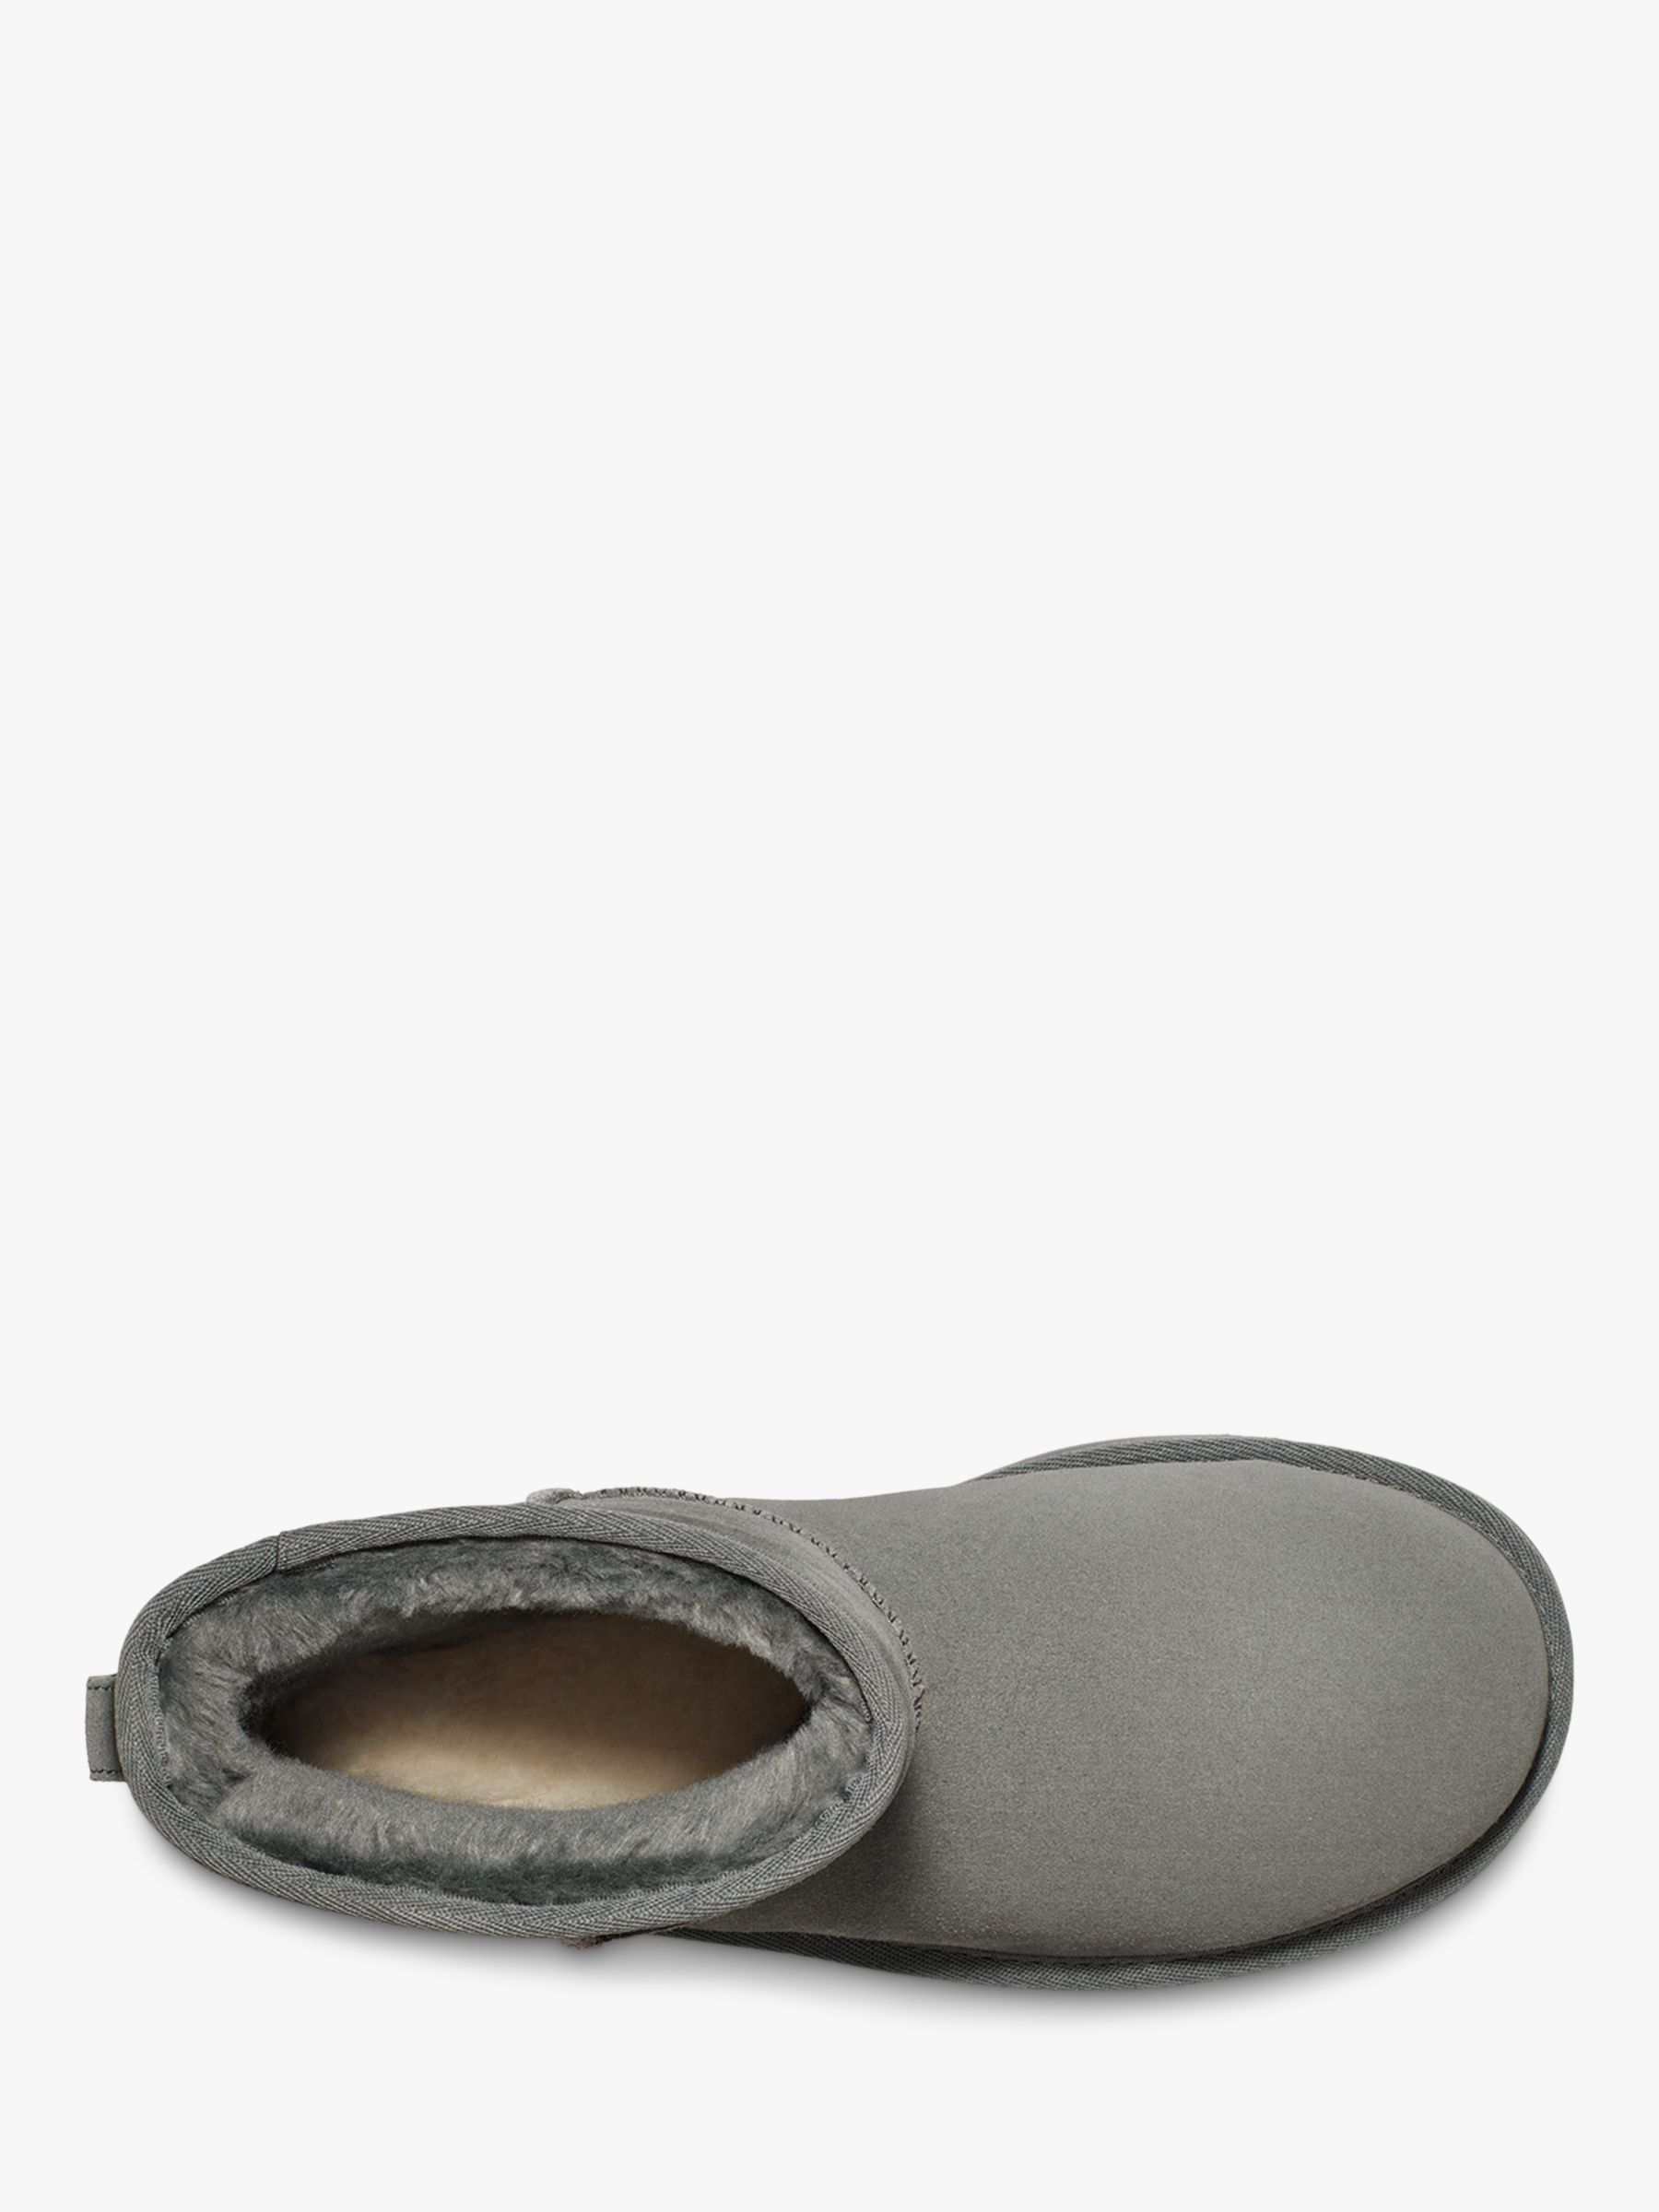 Buy UGG Class Mini Suede Flatform Ankle Boots Online at johnlewis.com